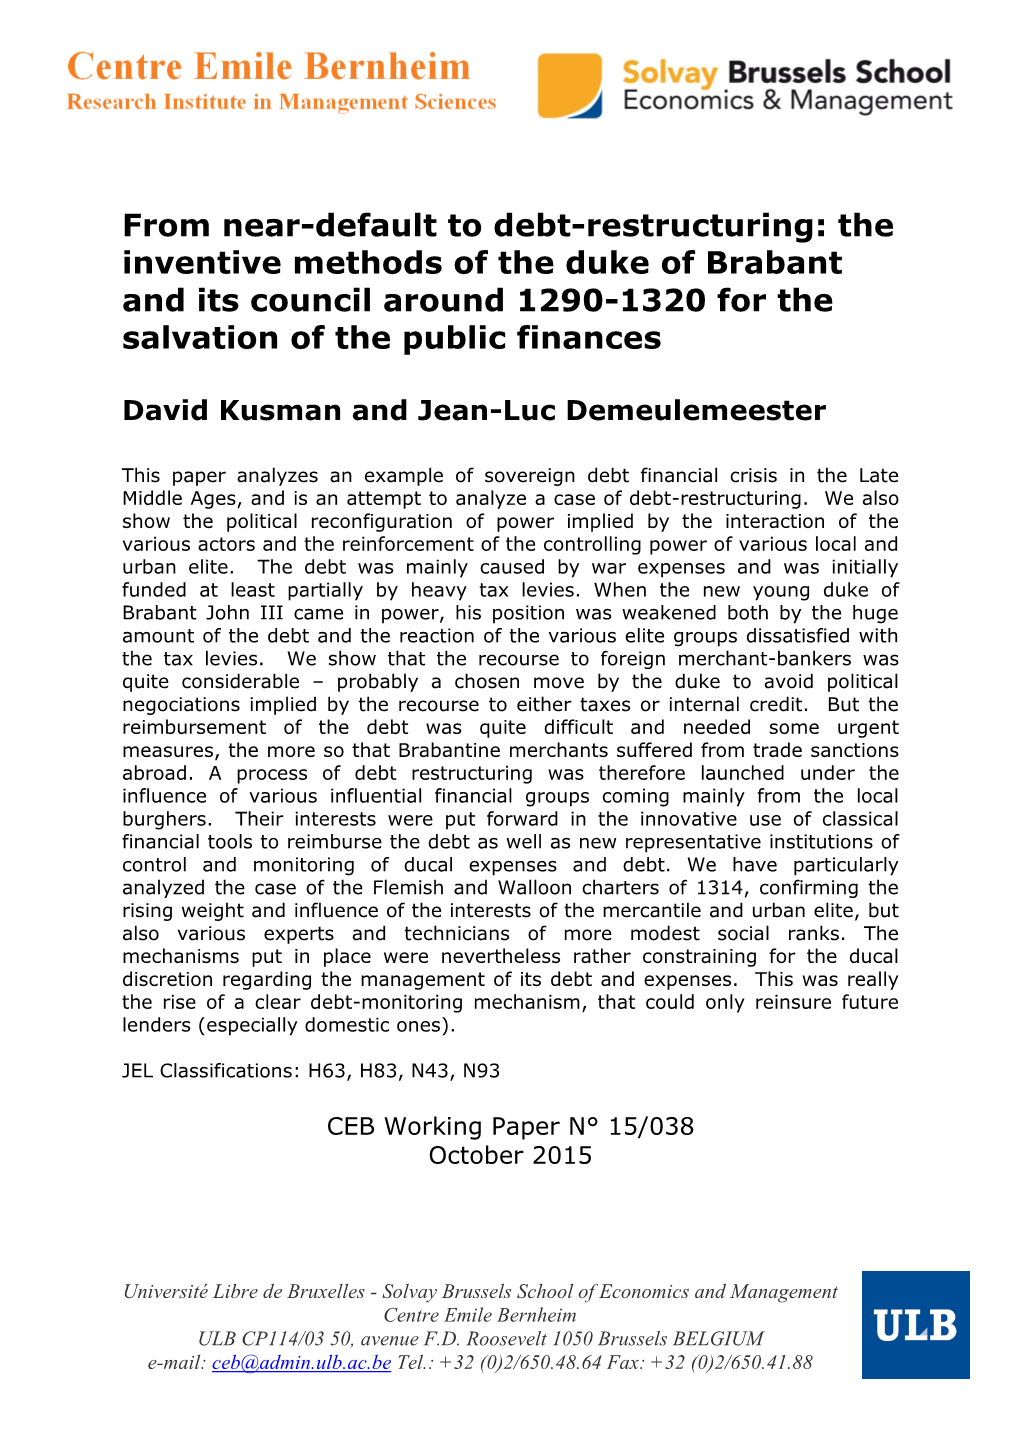 From Near-Default to Debt-Restructuring: the Inventive Methods of the Duke of Brabant and Its Council Around 1290-1320 for the Salvation of the Public Finances